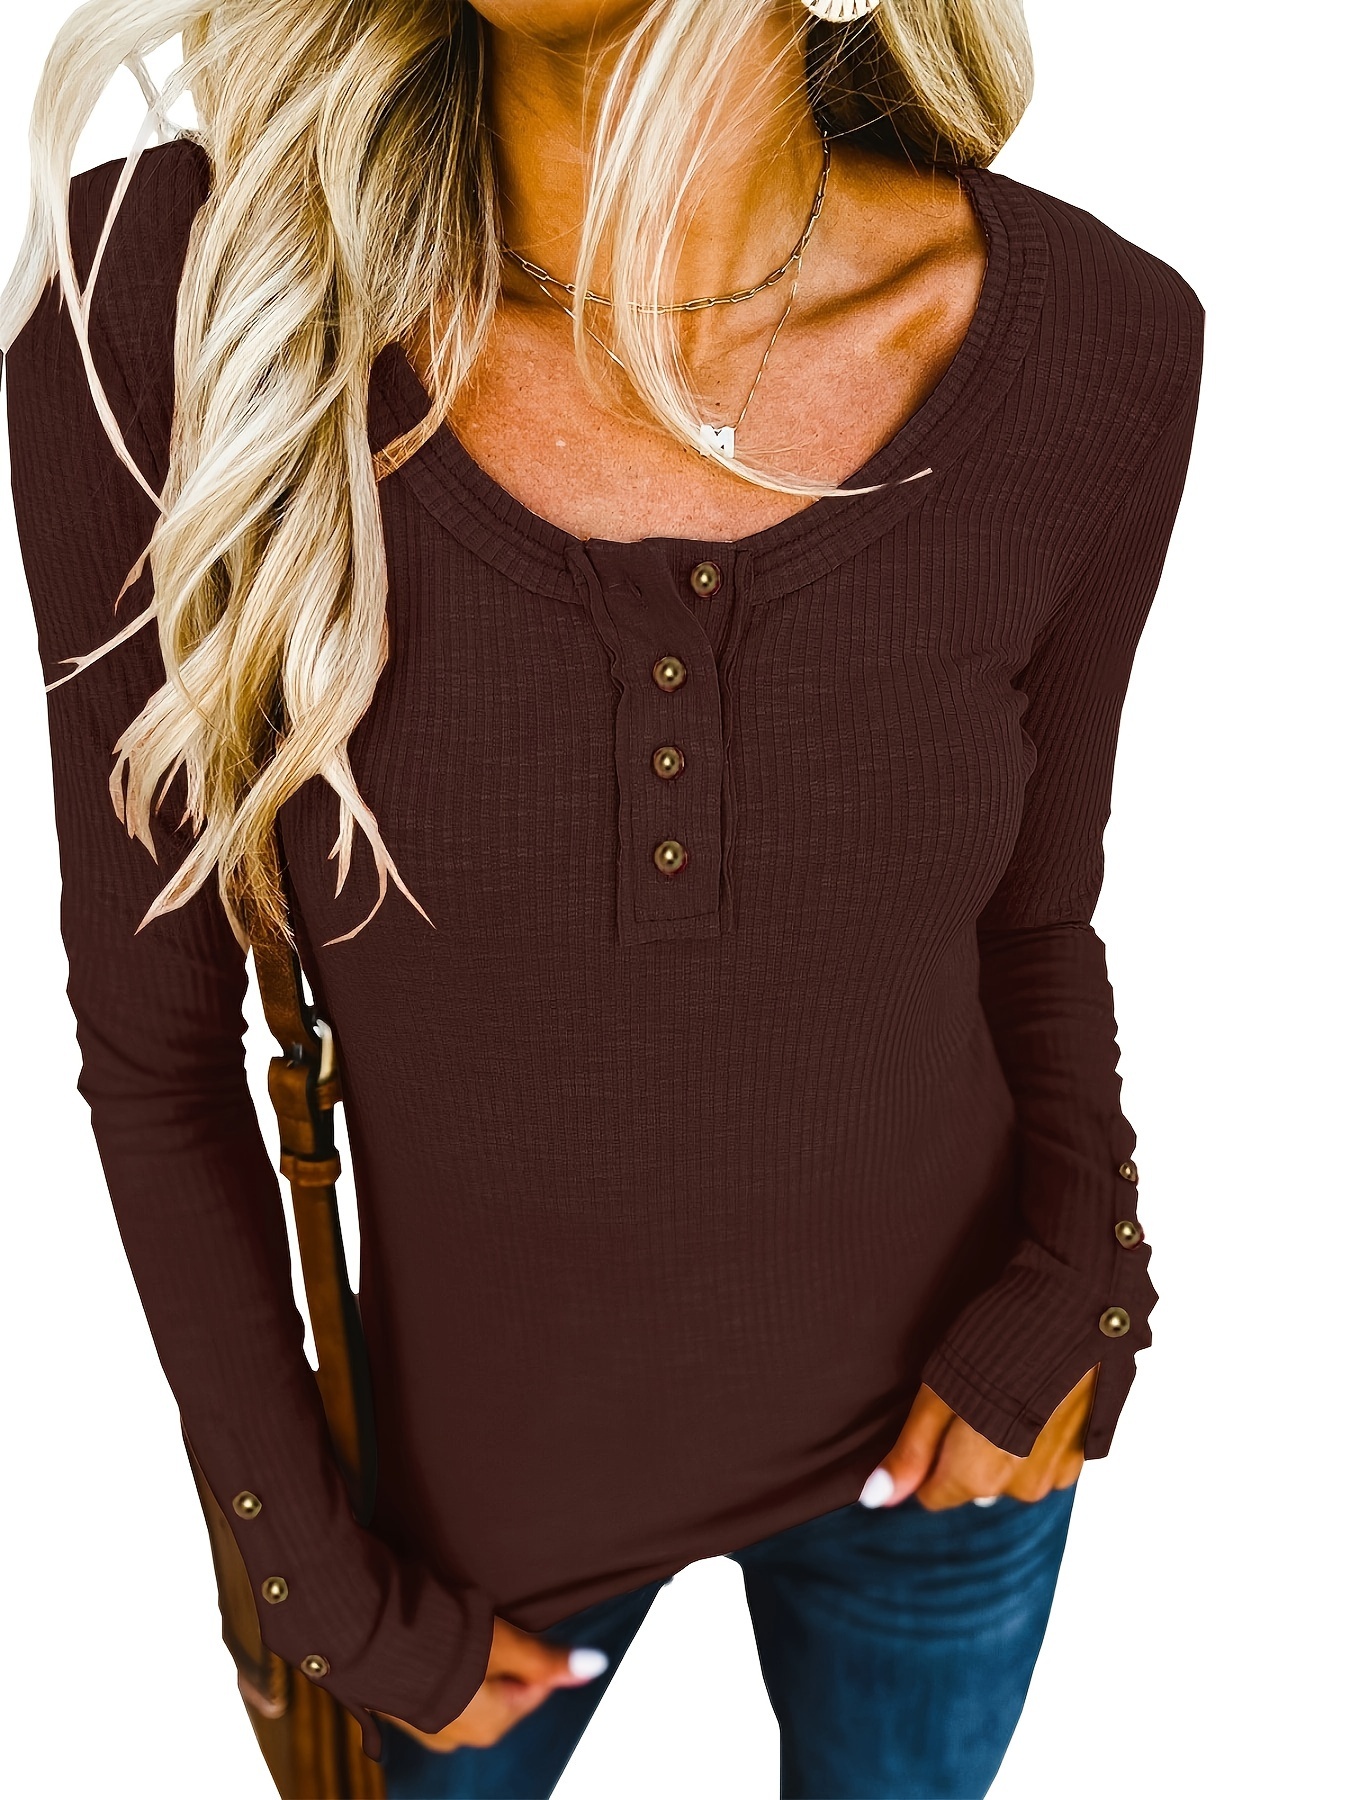 TQWQT Womens Long Sleeve Henley Tops Casual Button Up Tunic Blouse